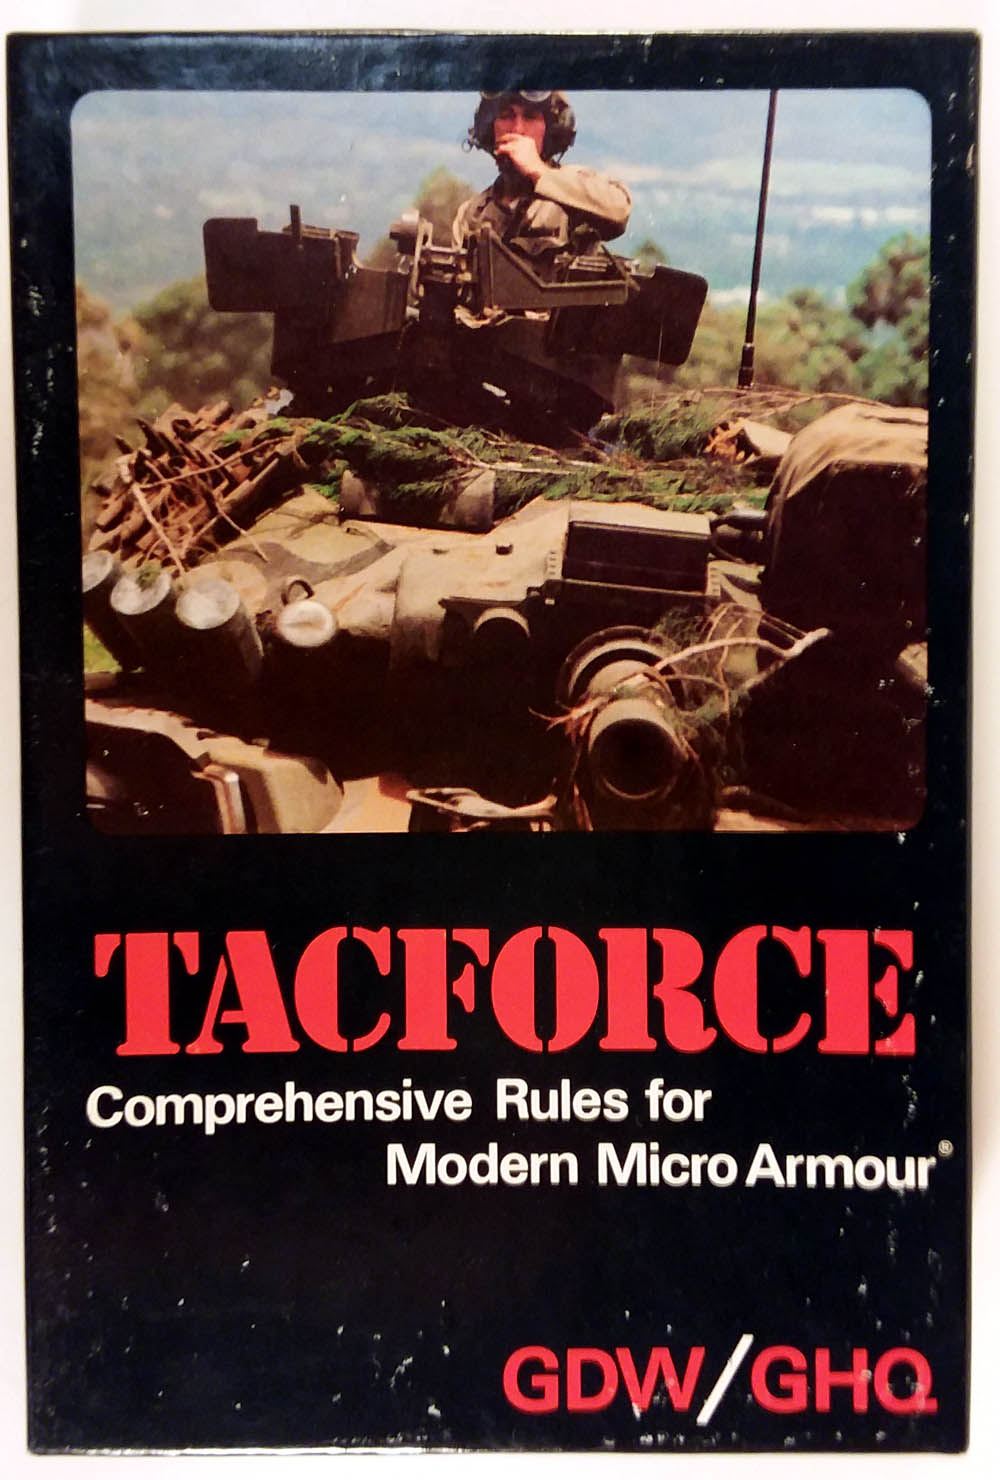 Image for GDW TACFORCE Comprehensive Rules for Modern Micro Armour 1st ed 1975